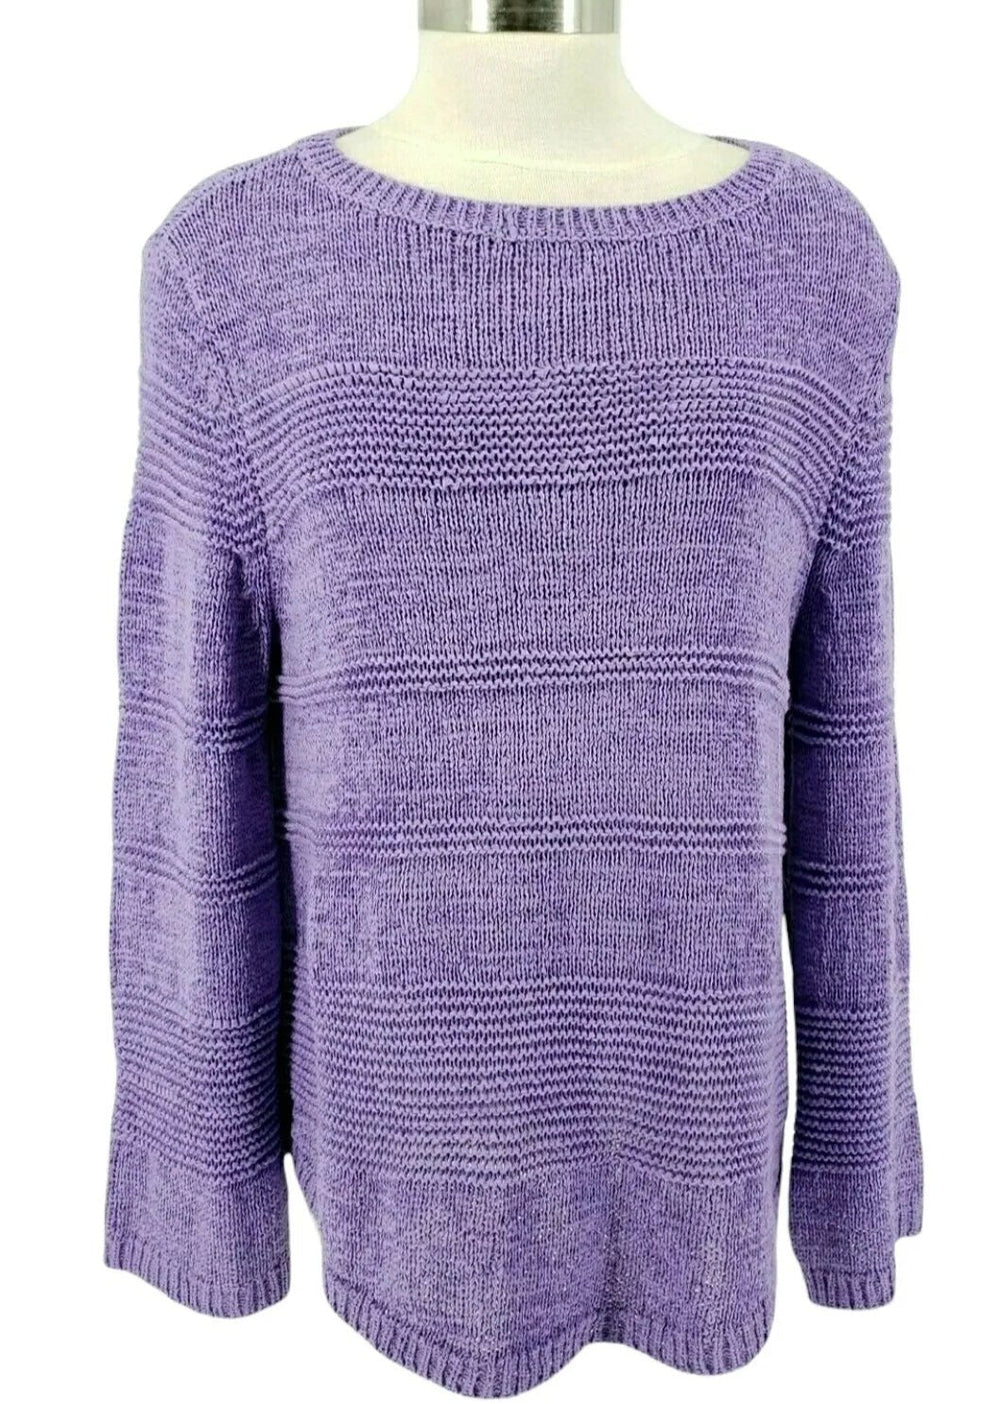 Style & Co Sweater Lilac Purple Long Sleeve Crochet Knit Pullover NWT Womens - BELLEZA'S - Style & Co Sweater Lilac Purple Long Sleeve Crochet Knit Pullover NWT Womens - BELLEZA'S - Sweater -